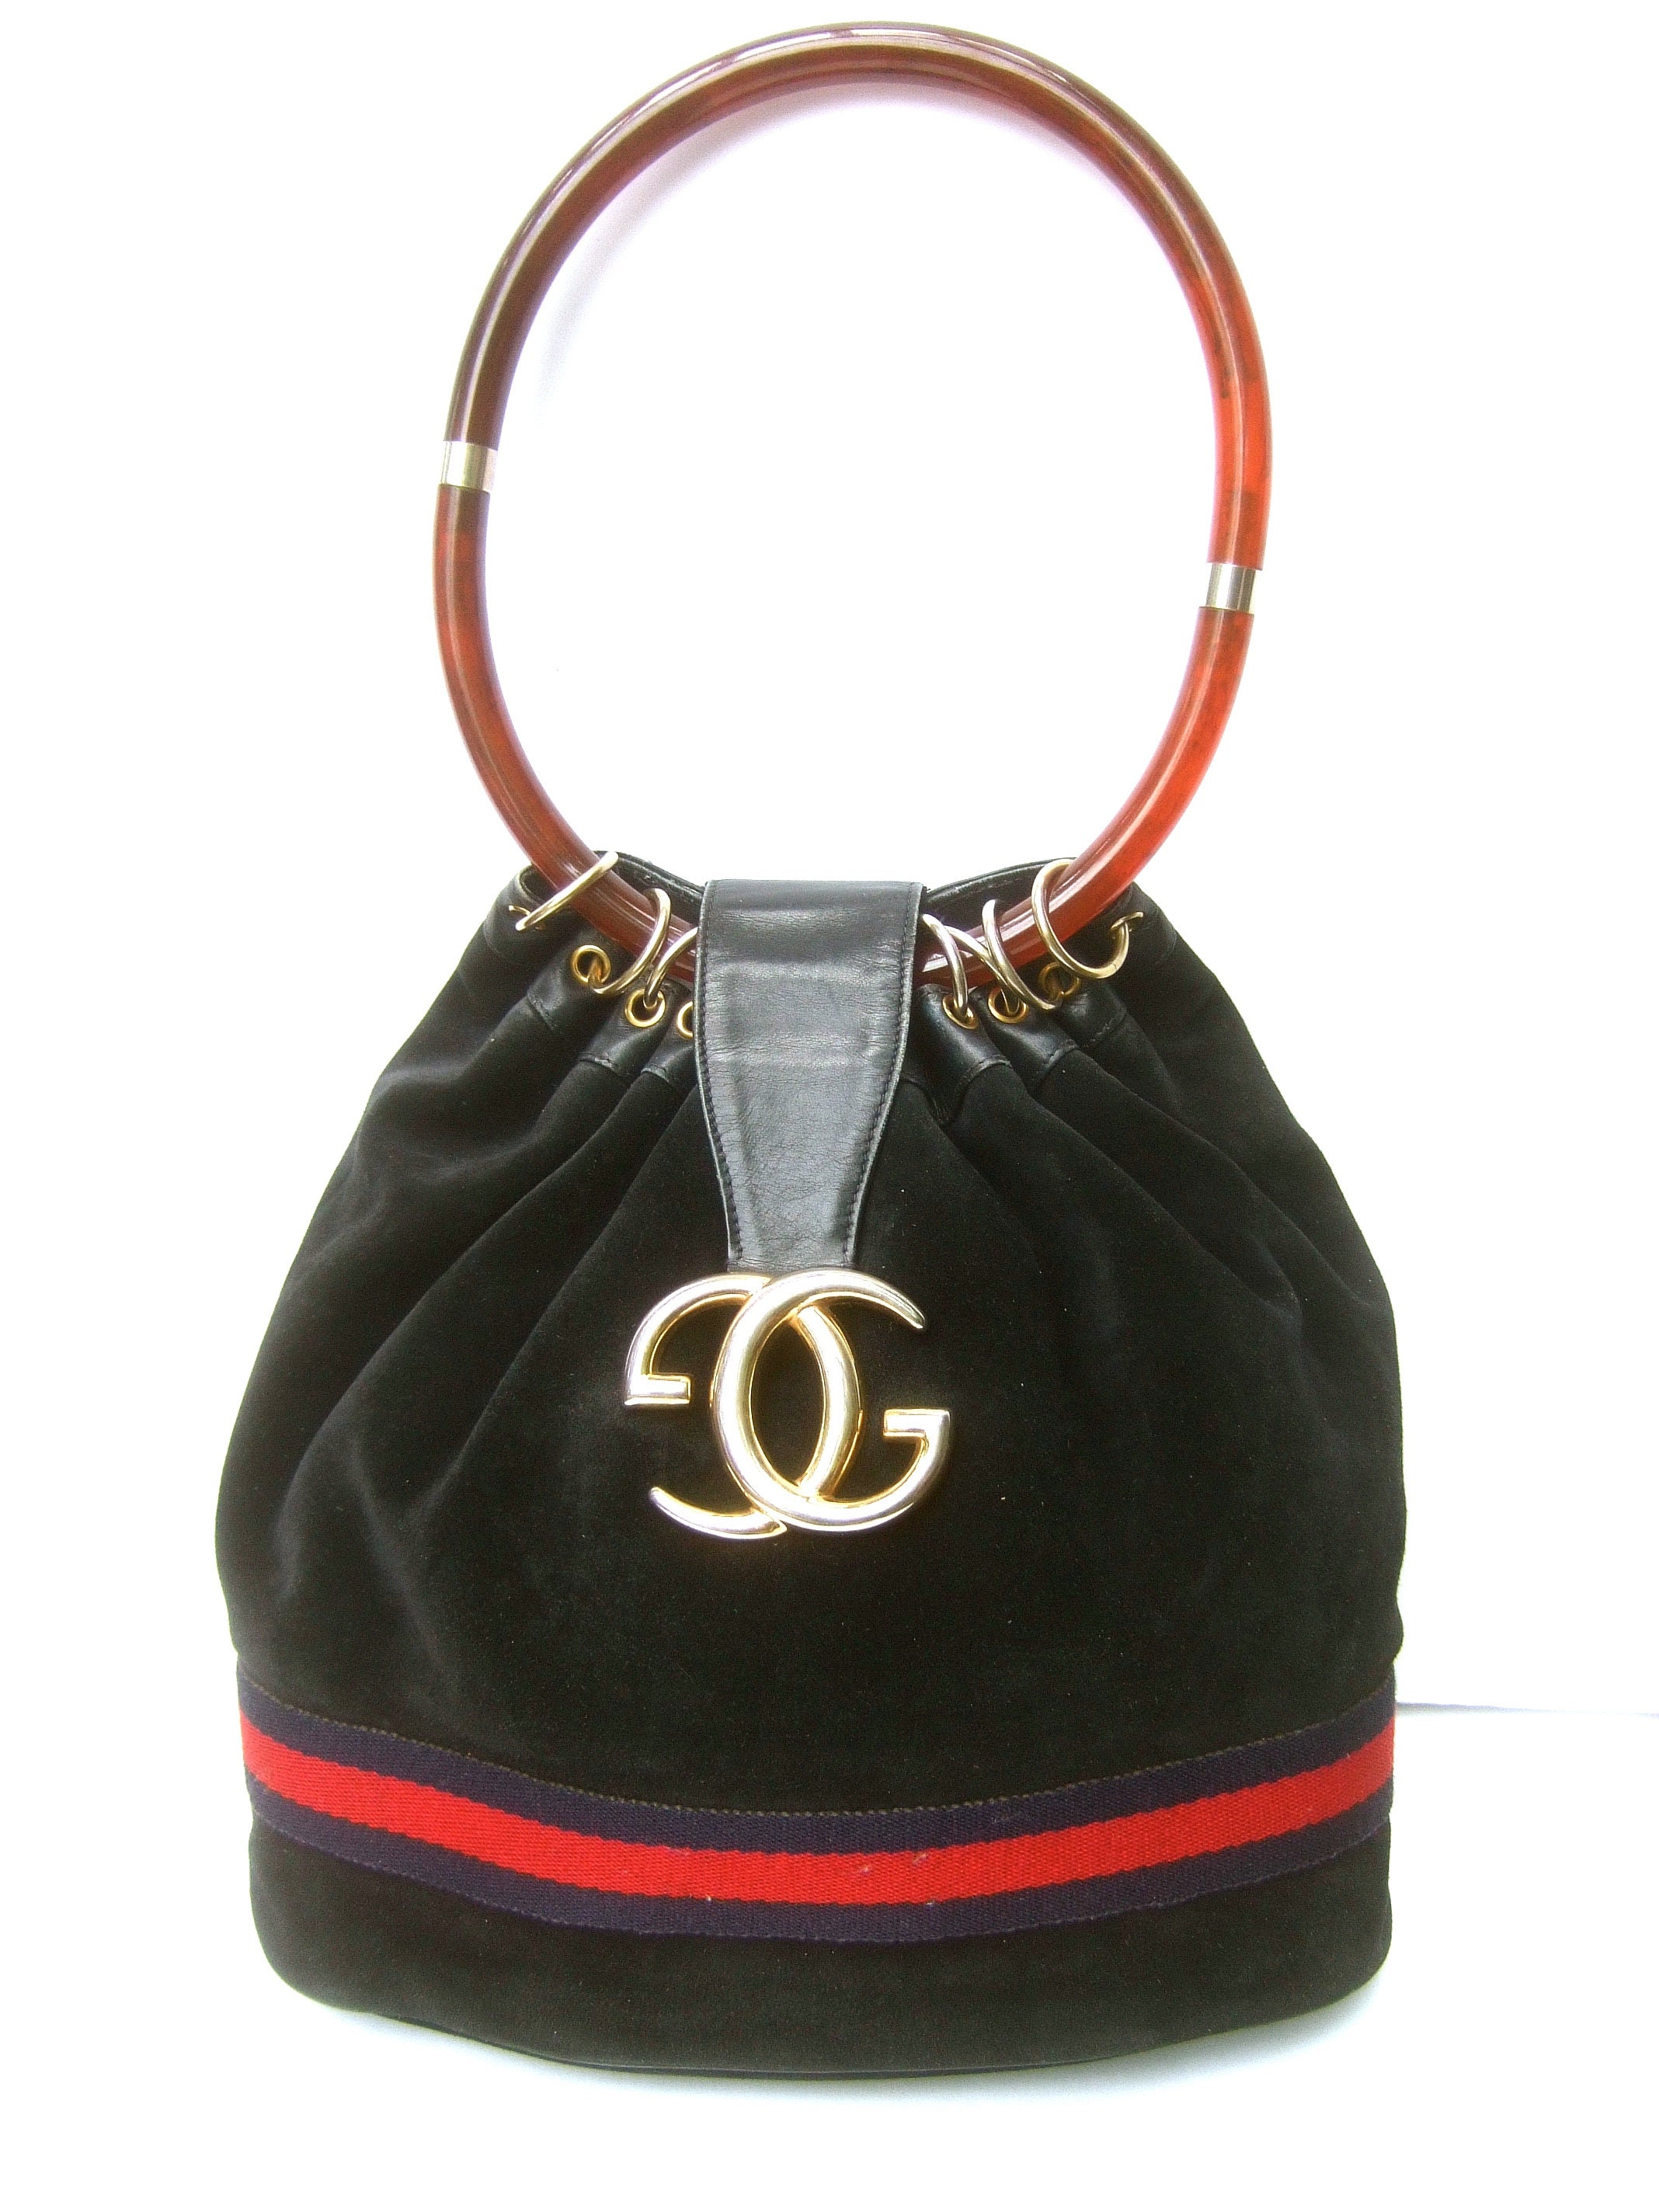 Vintage GUCCI Black Leather Handbag with Red Leather Interior c.1960s